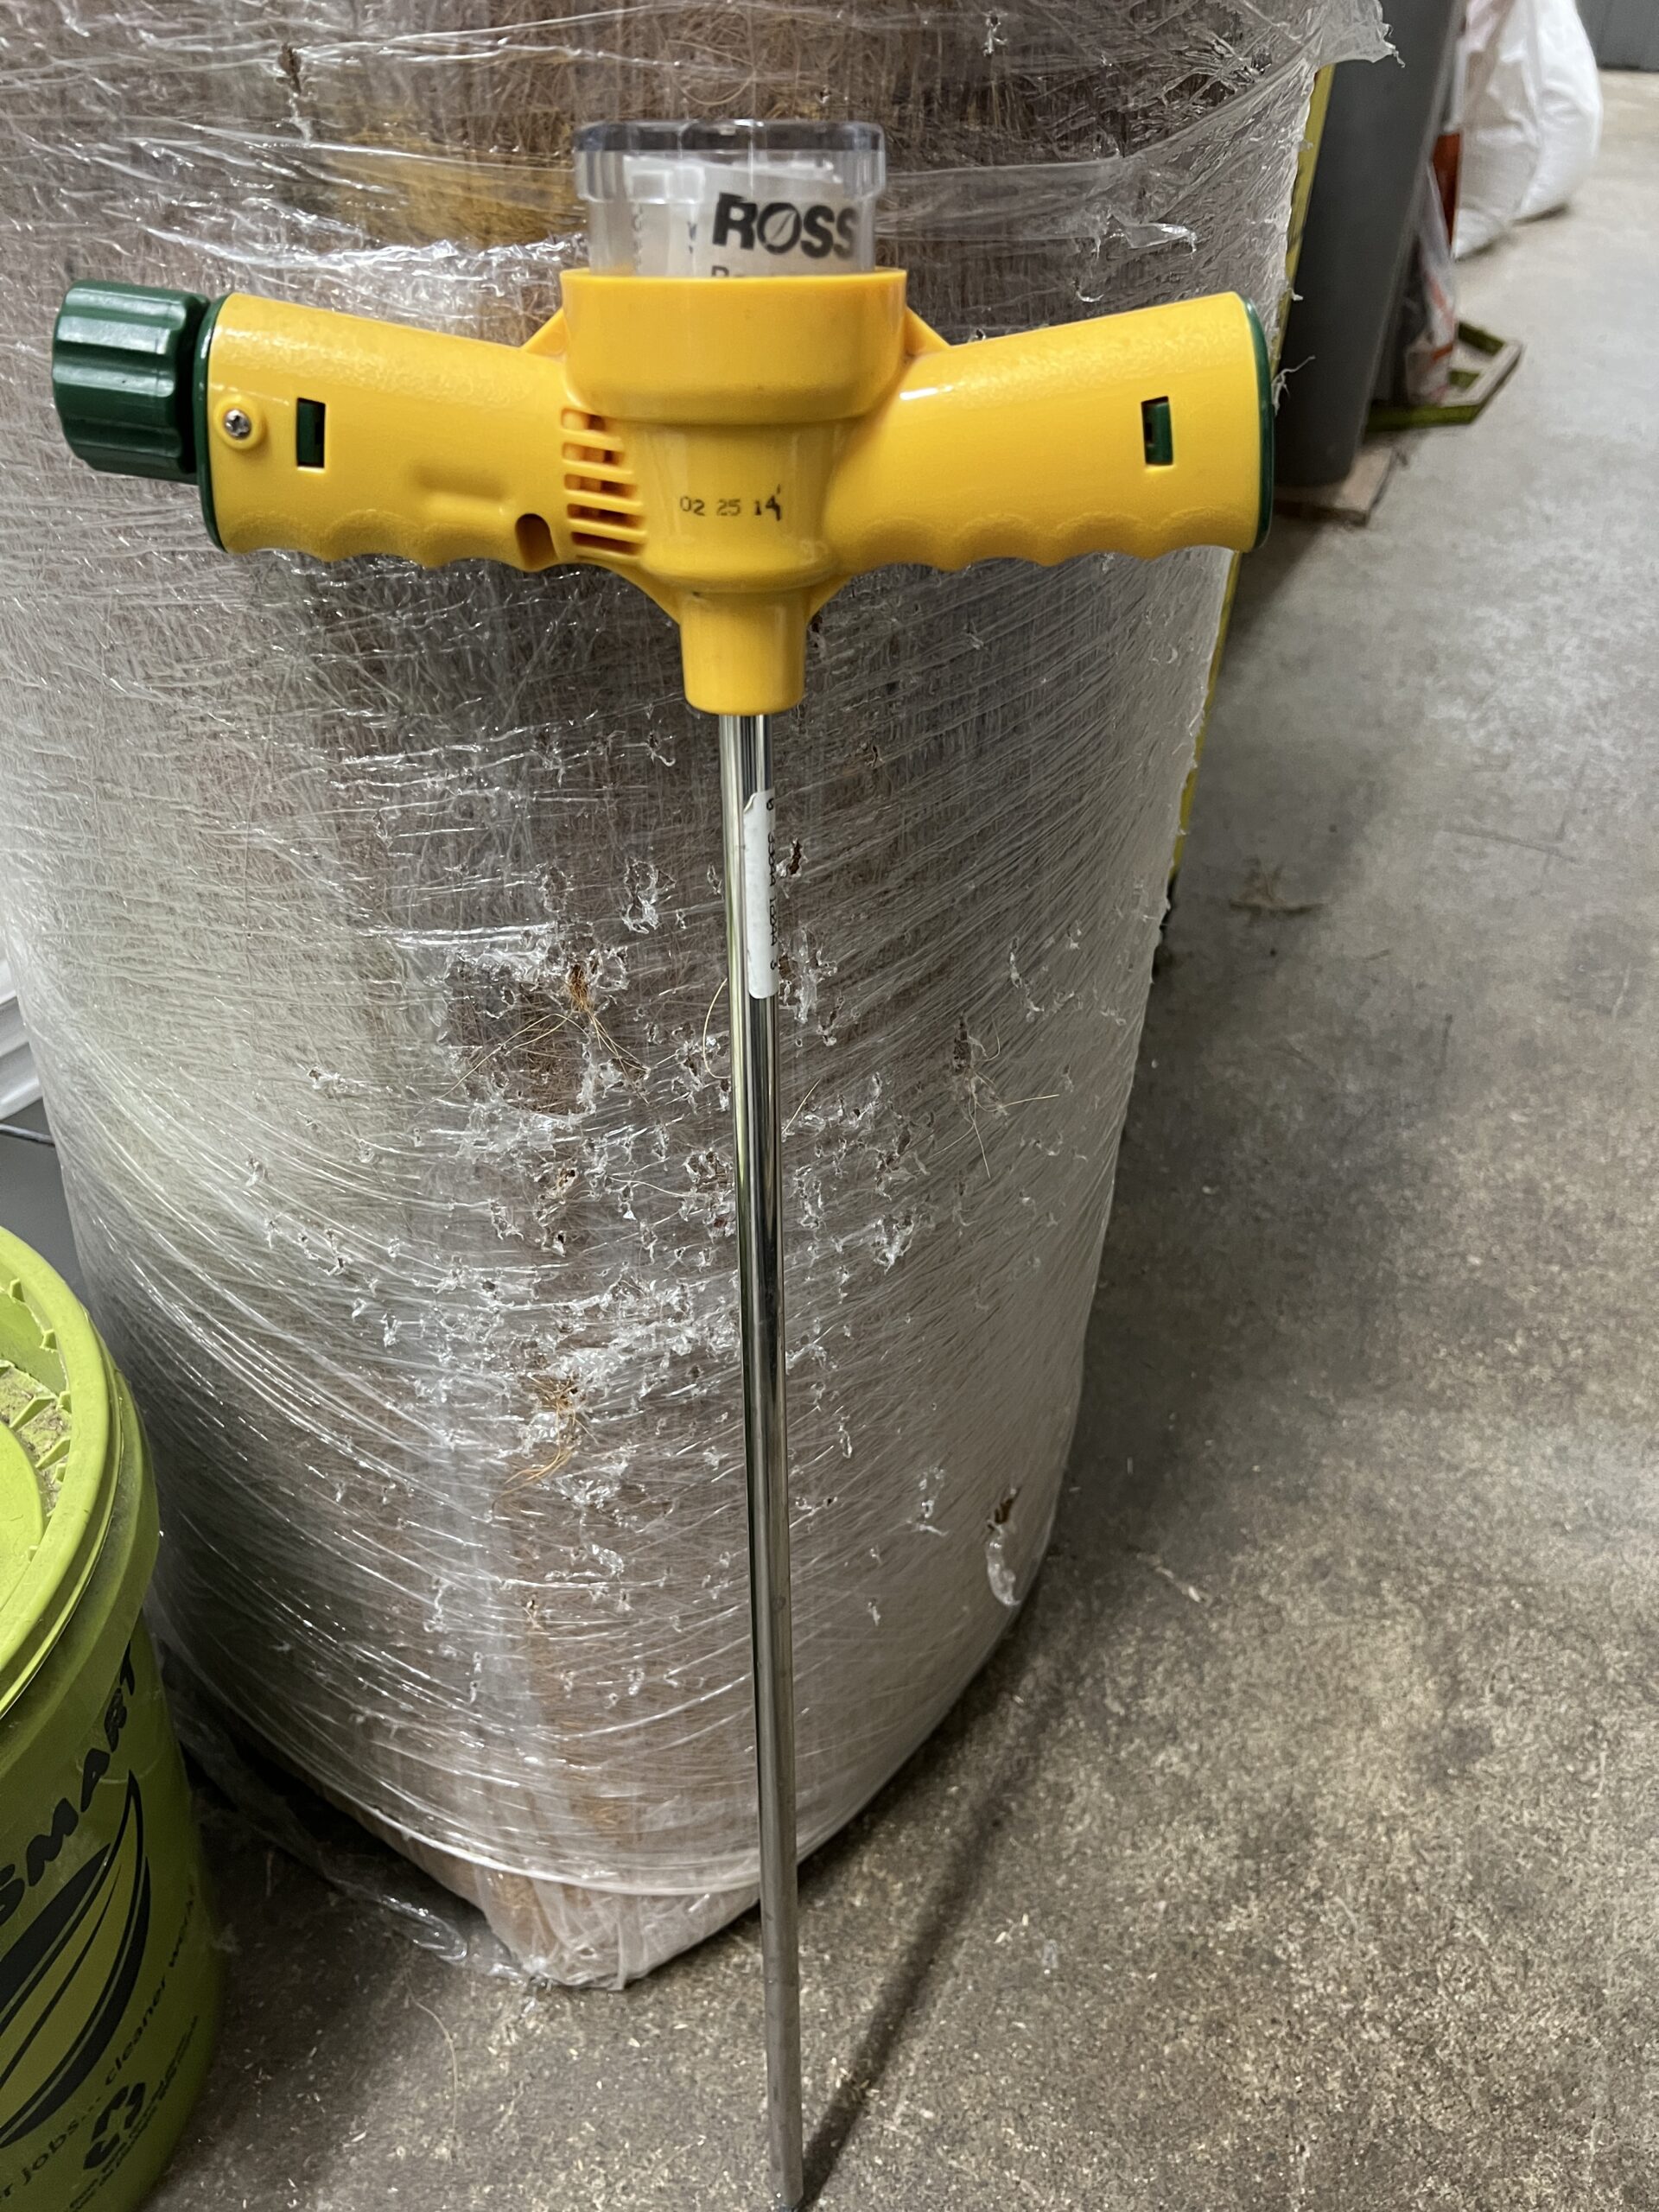 This is a Ross needle-type tree feeder. The fertilizer (proprietary) is added to the jar on top and a garden hose is attached to the left side. The needle is pushed into the ground, and as the trigger is pulled the diluted fertilizer is injected into the ground in the root zone. Feeder is about $45 and refills are available locally and online.
ANDREW MESSINGER